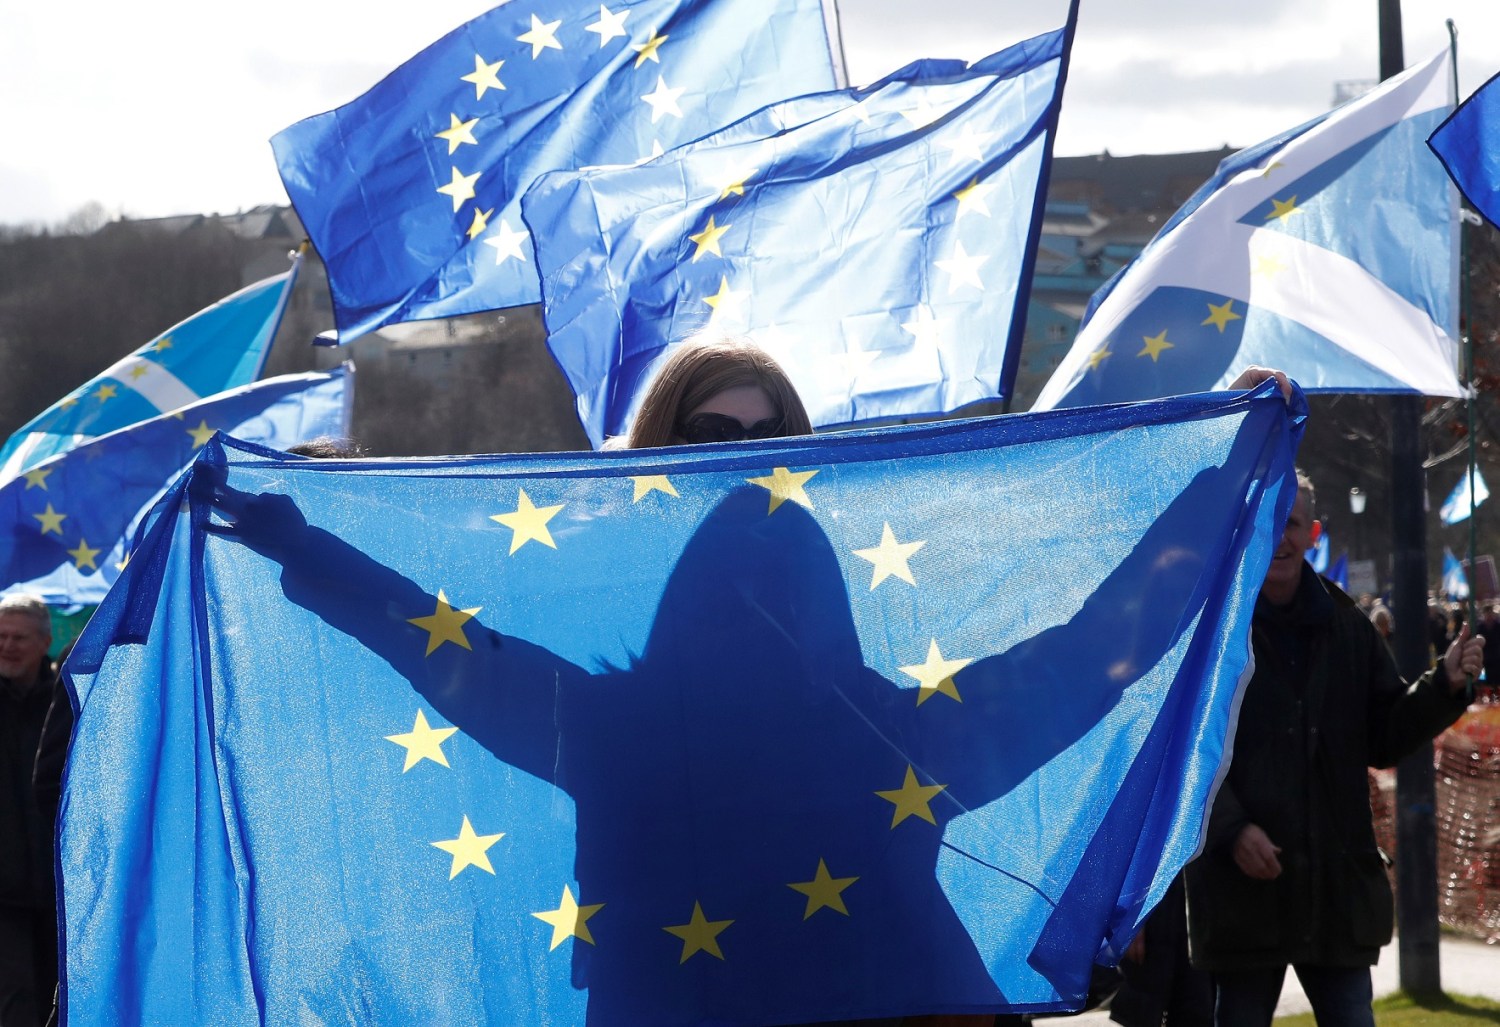 A protesters waves an EU flag as others wave Saltires as they take part in a demonstration to demand a vote on the Brexit deal between Britain and the European Union in Edinburgh, Scotland, March 24, 2018. REUTERS/Russell Cheyne - RC176231A500